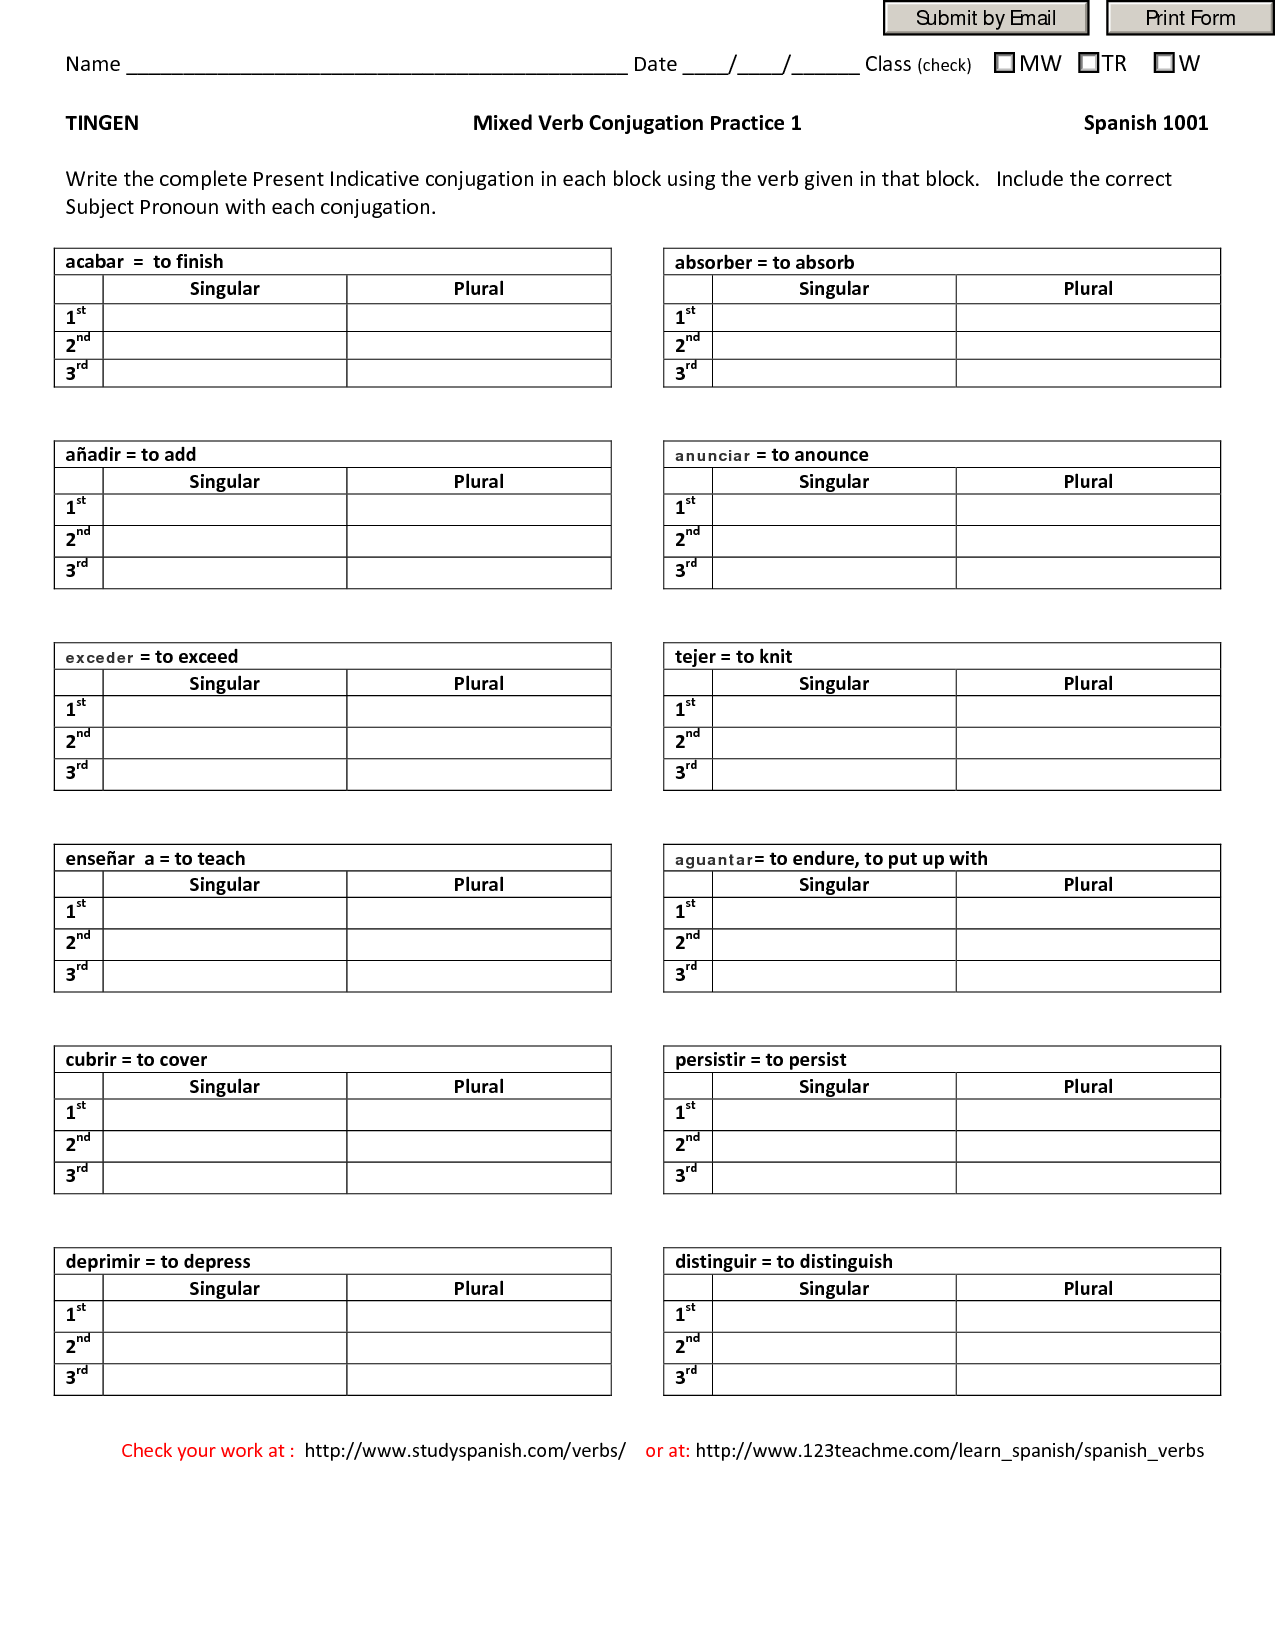 Conjugation Of Regular Verbs In Spanish Worksheet Answers 1 2 Ejercicio